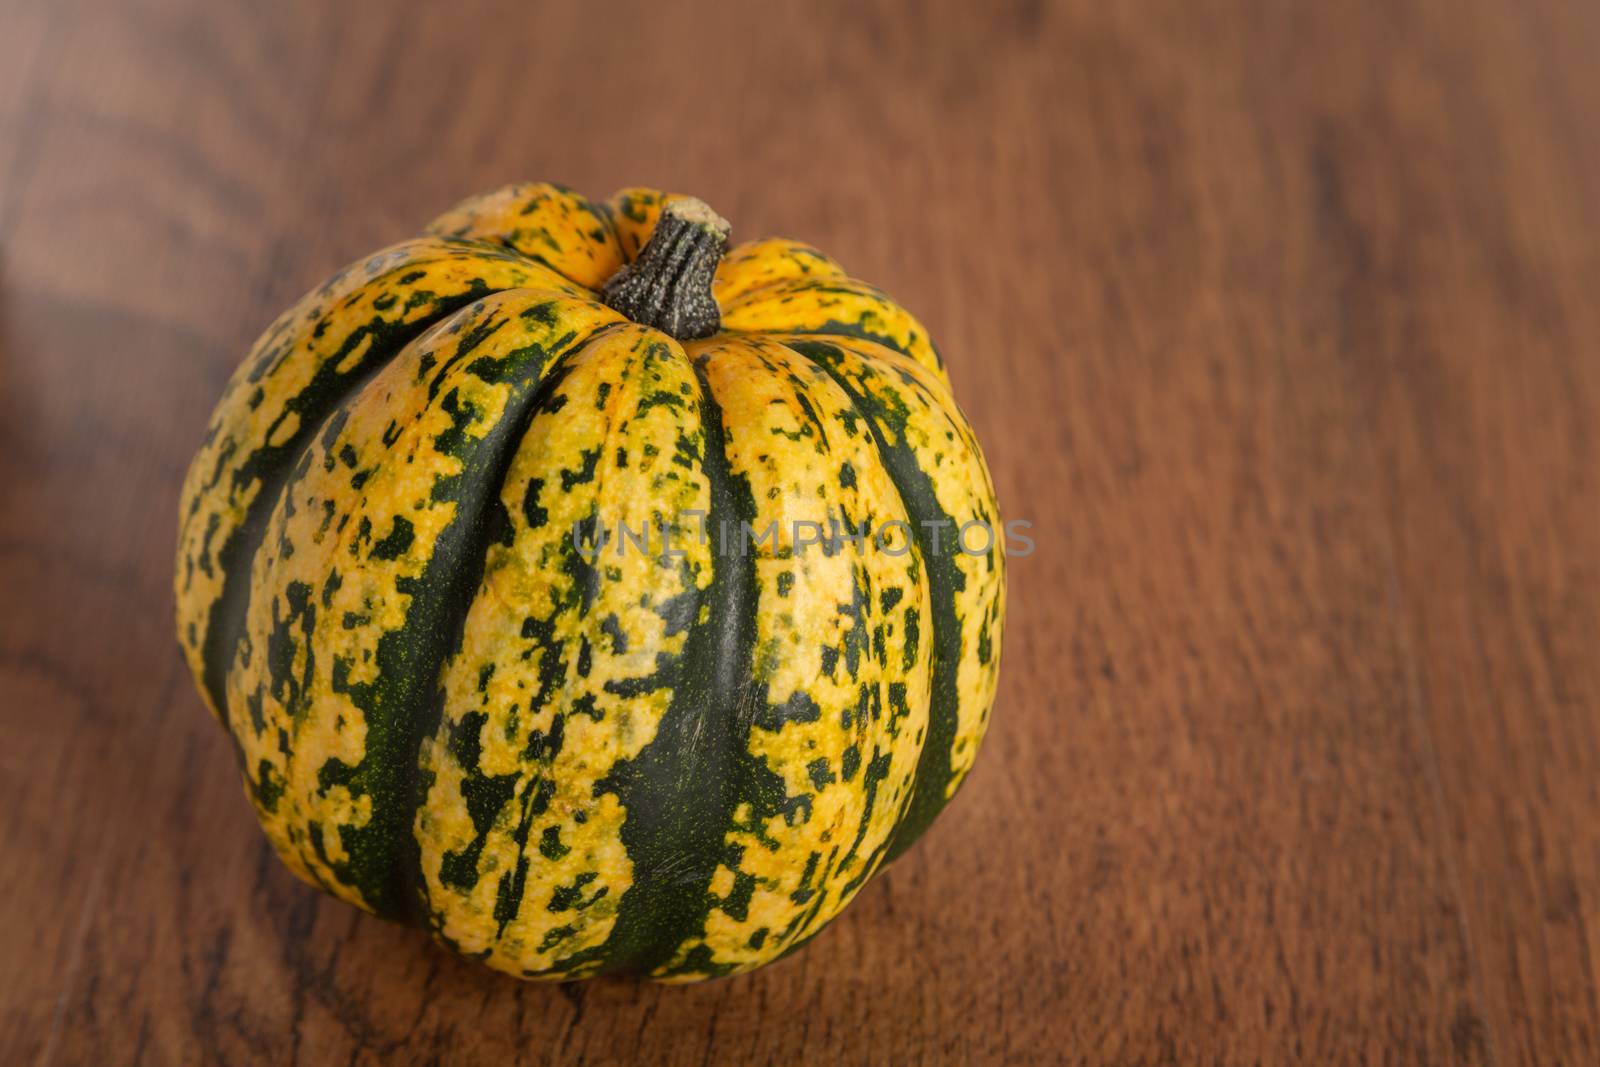 Colored beautiful pumpkin lies on a wooden background by 25ehaag6